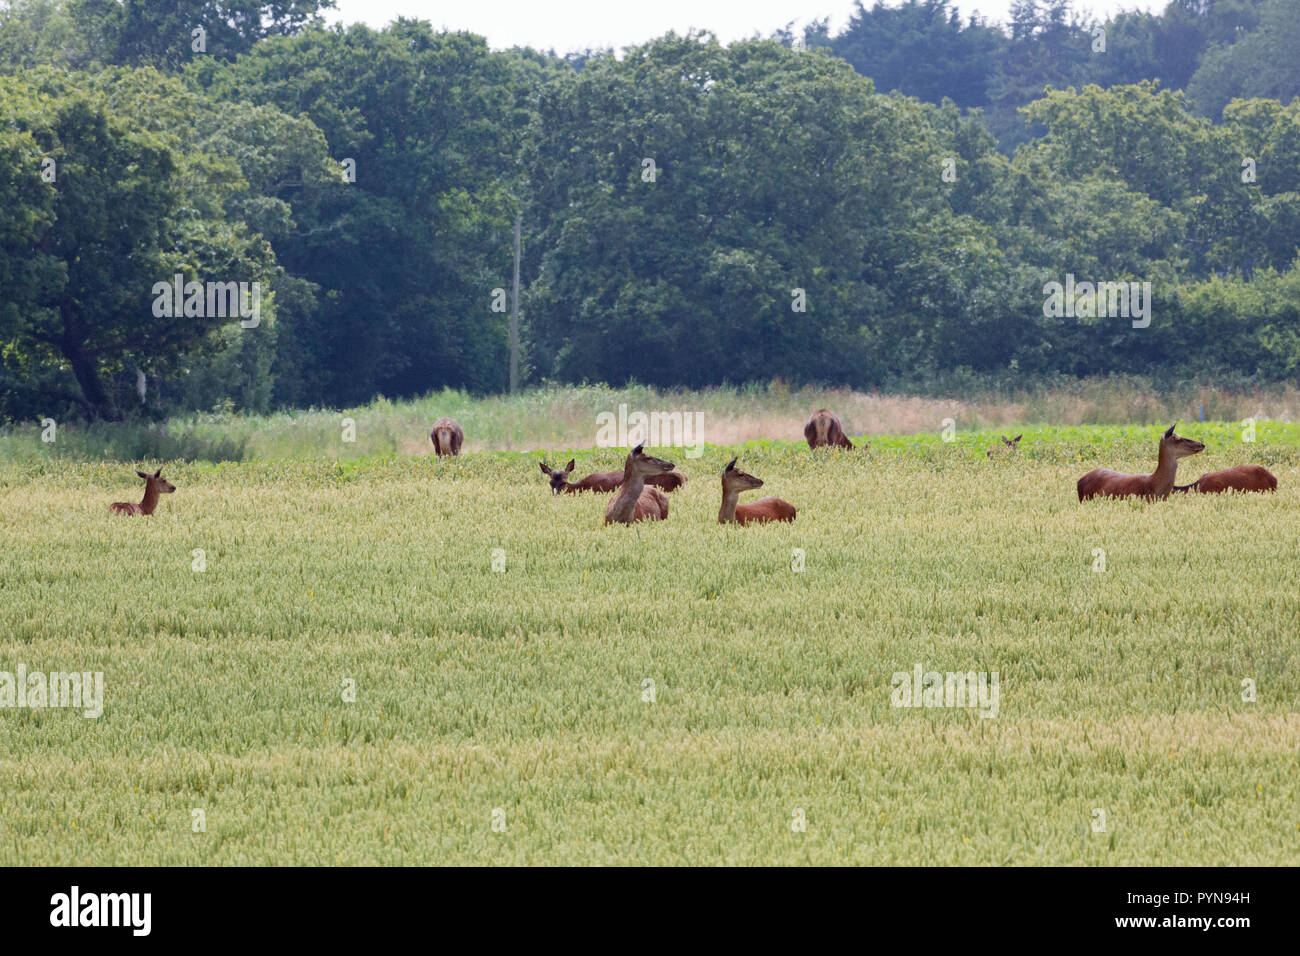 Red Deer (Cervus elaphus). Hinds or females. Feeding from ripening Wheat crop. Browsing seed head panicles from the stalk. Calthorpe Farm, Ingham. Norfolk. Stock Photo